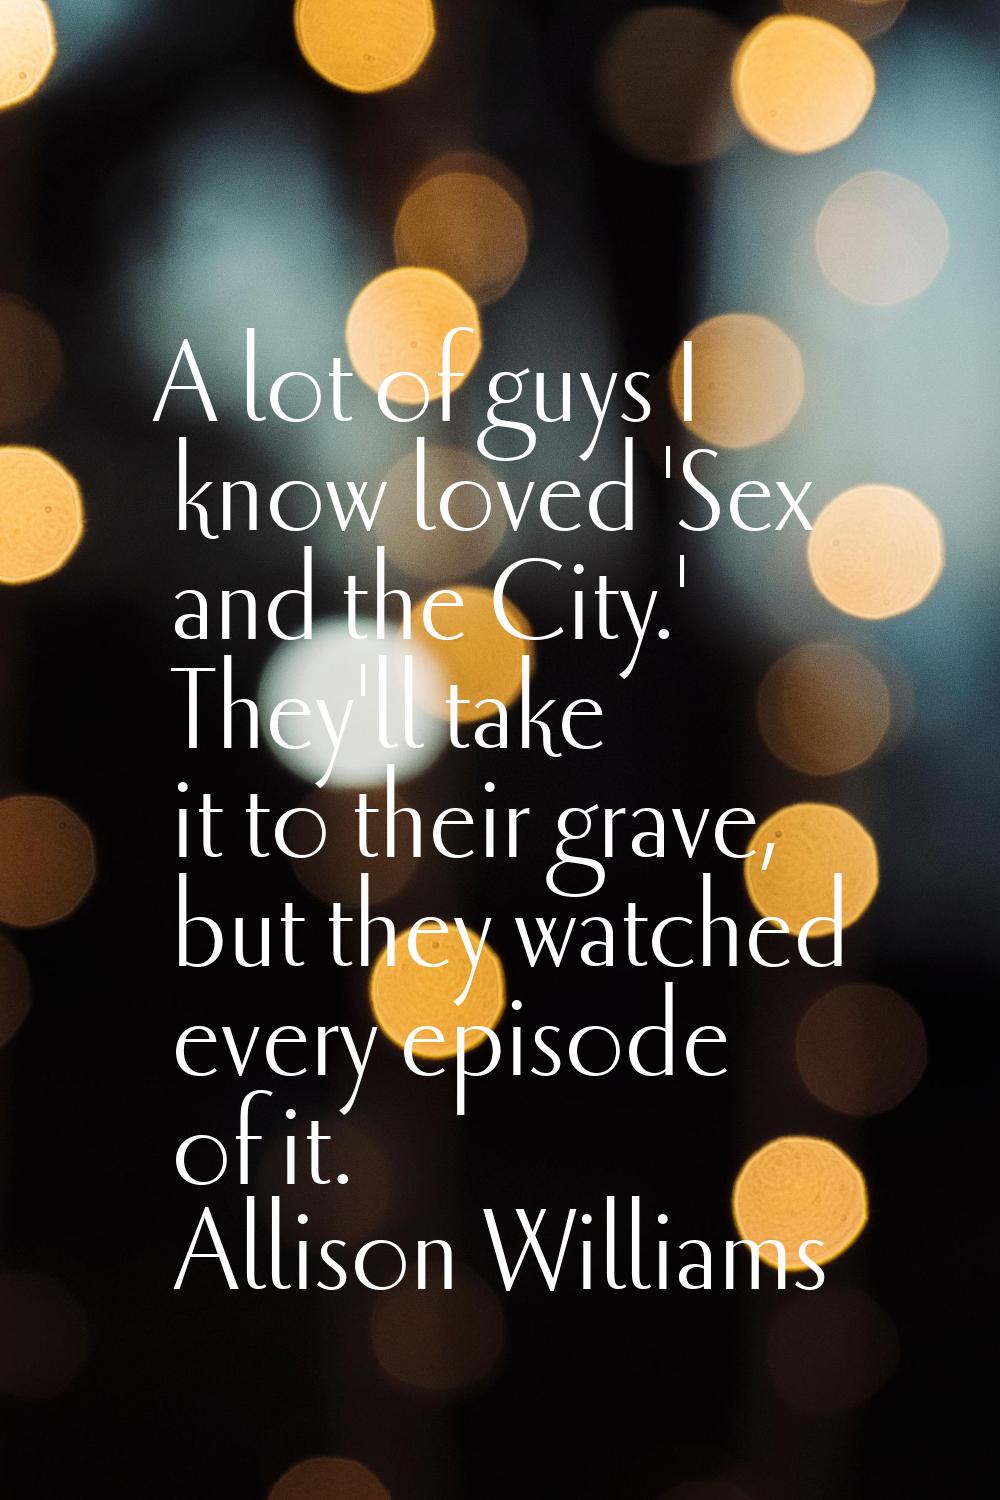 A lot of guys I know loved 'Sex and the City.' They'll take it to their grave, but they watched eve